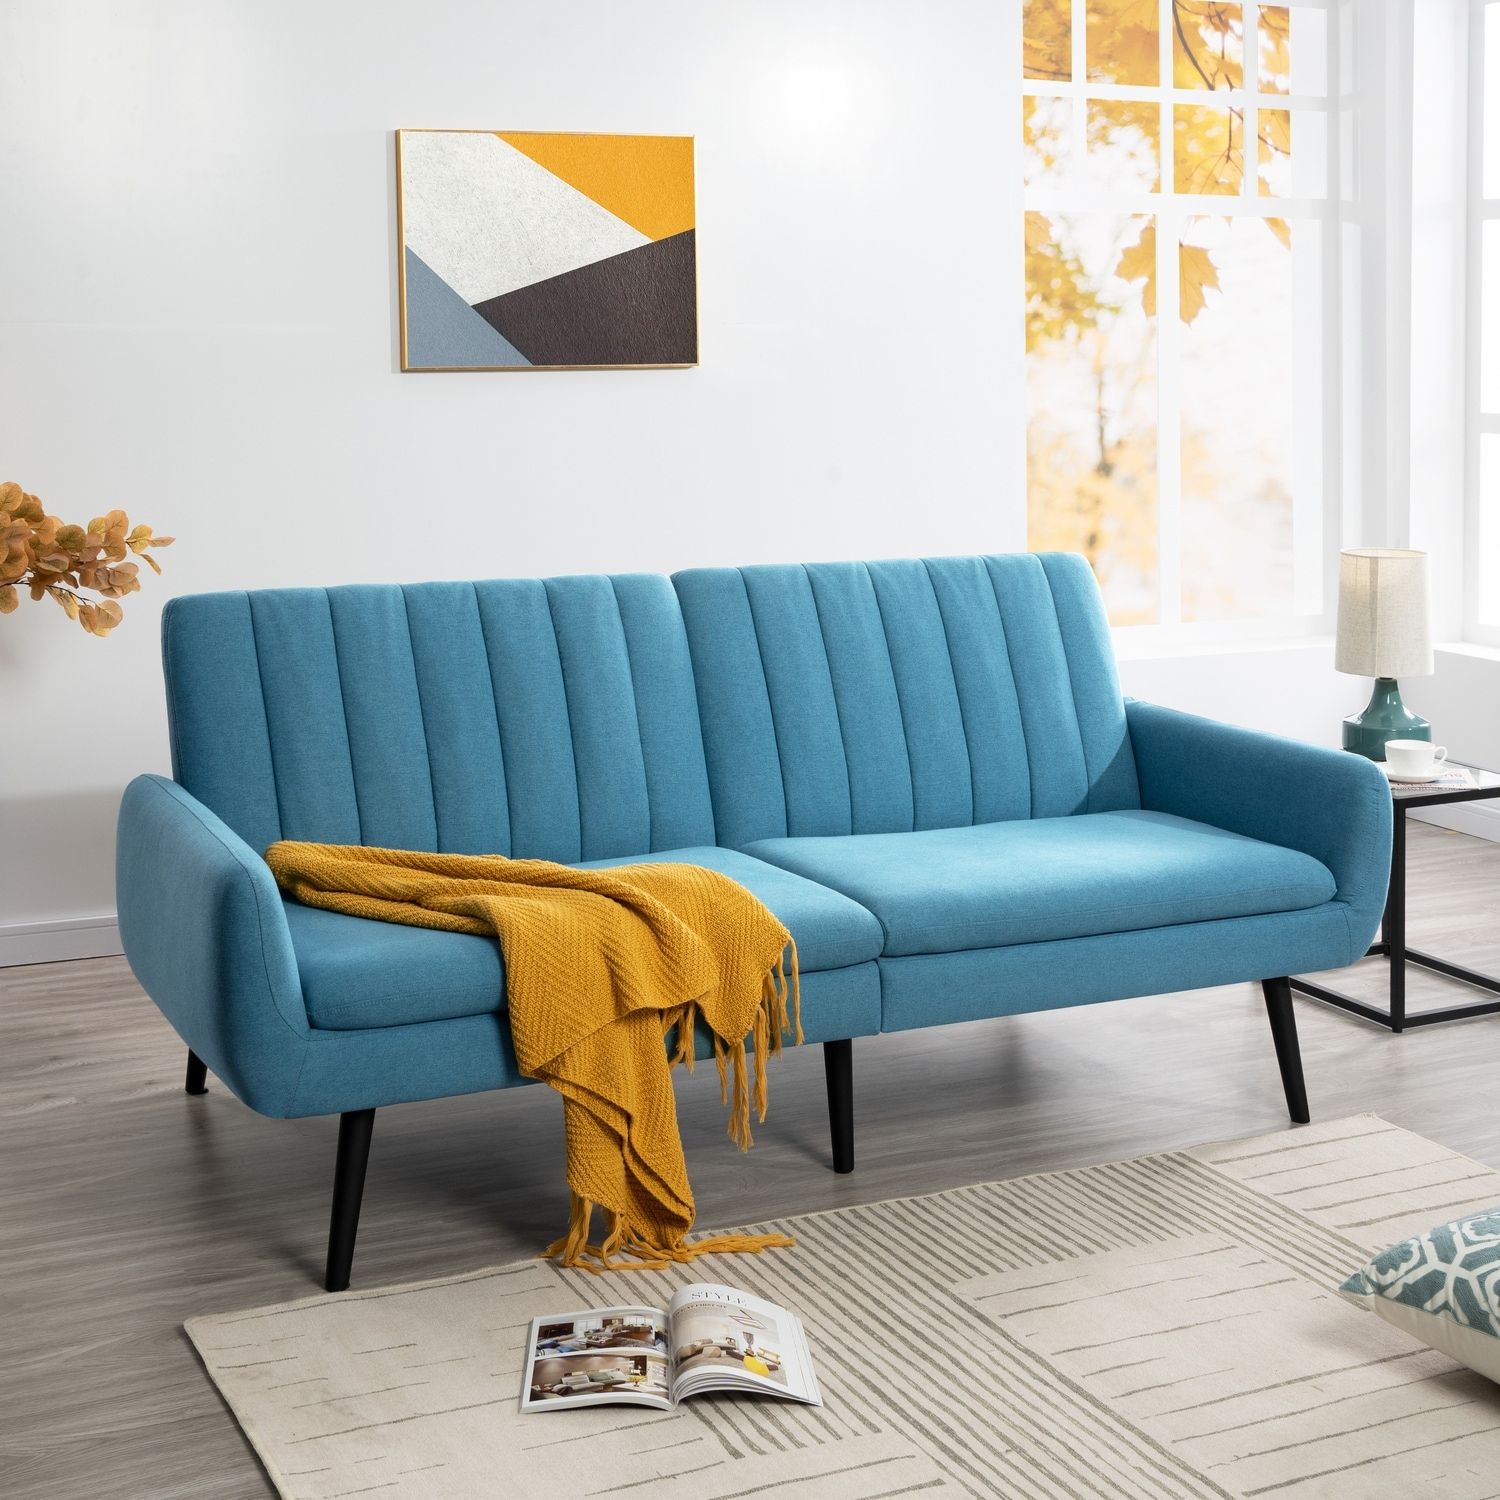 Raven Modern Futon Sofa Bed, Convertible Sofa Futon, Split Back Linen  Sleeper Couch For Living Room – On Sale – Bed Bath & Beyond – 38455072 For Modern Blue Linen Sofas (View 12 of 15)